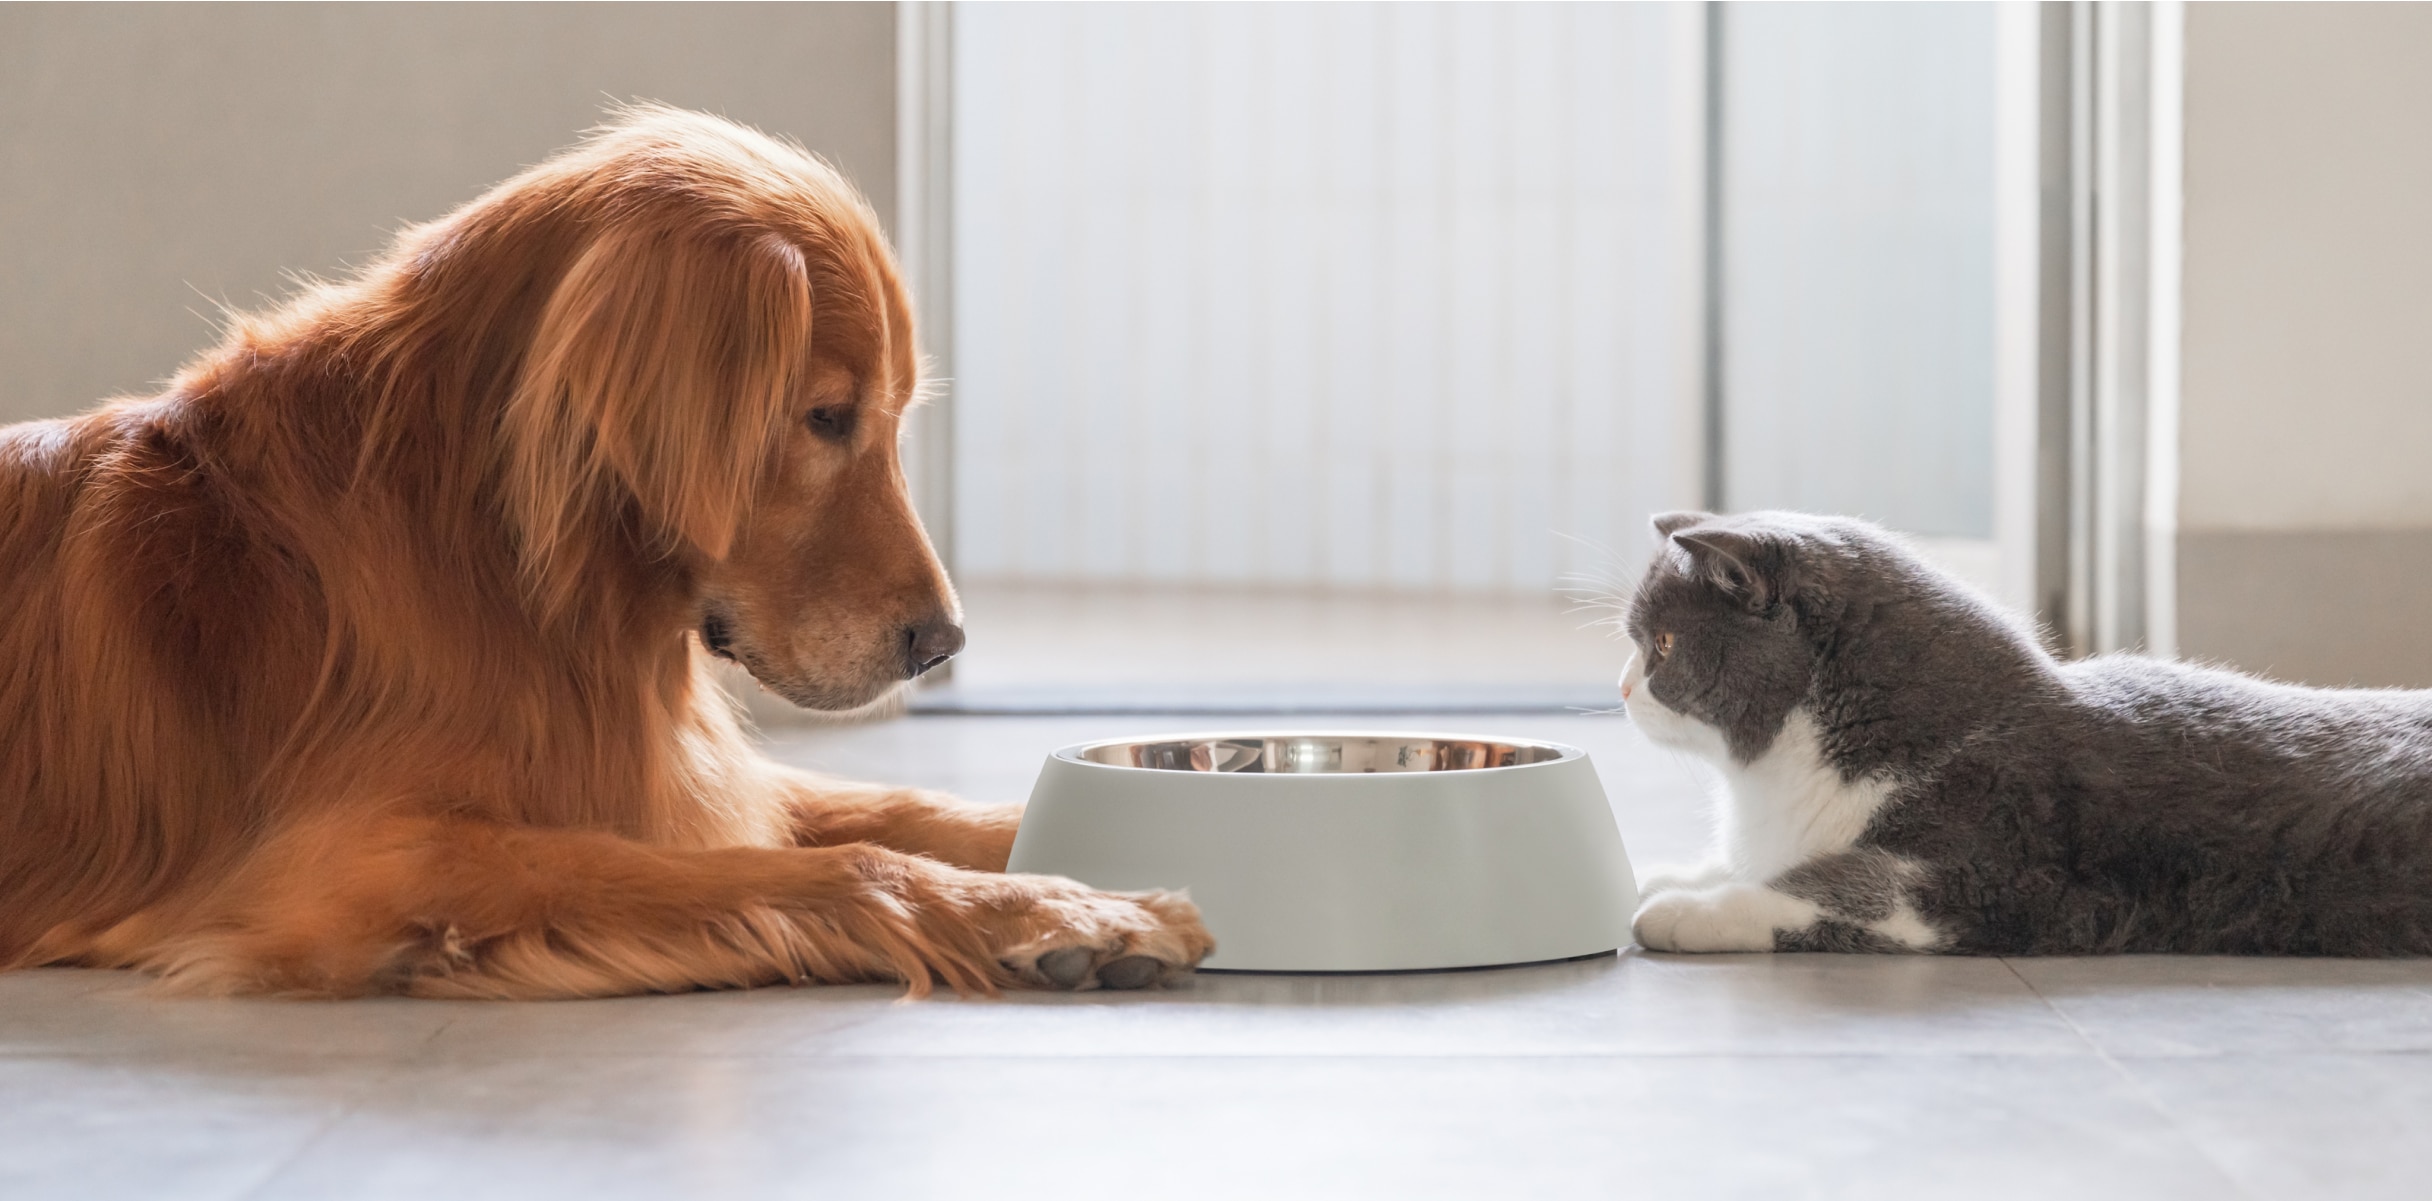 The science behind the creation of pet food - A dog and cat facing each other